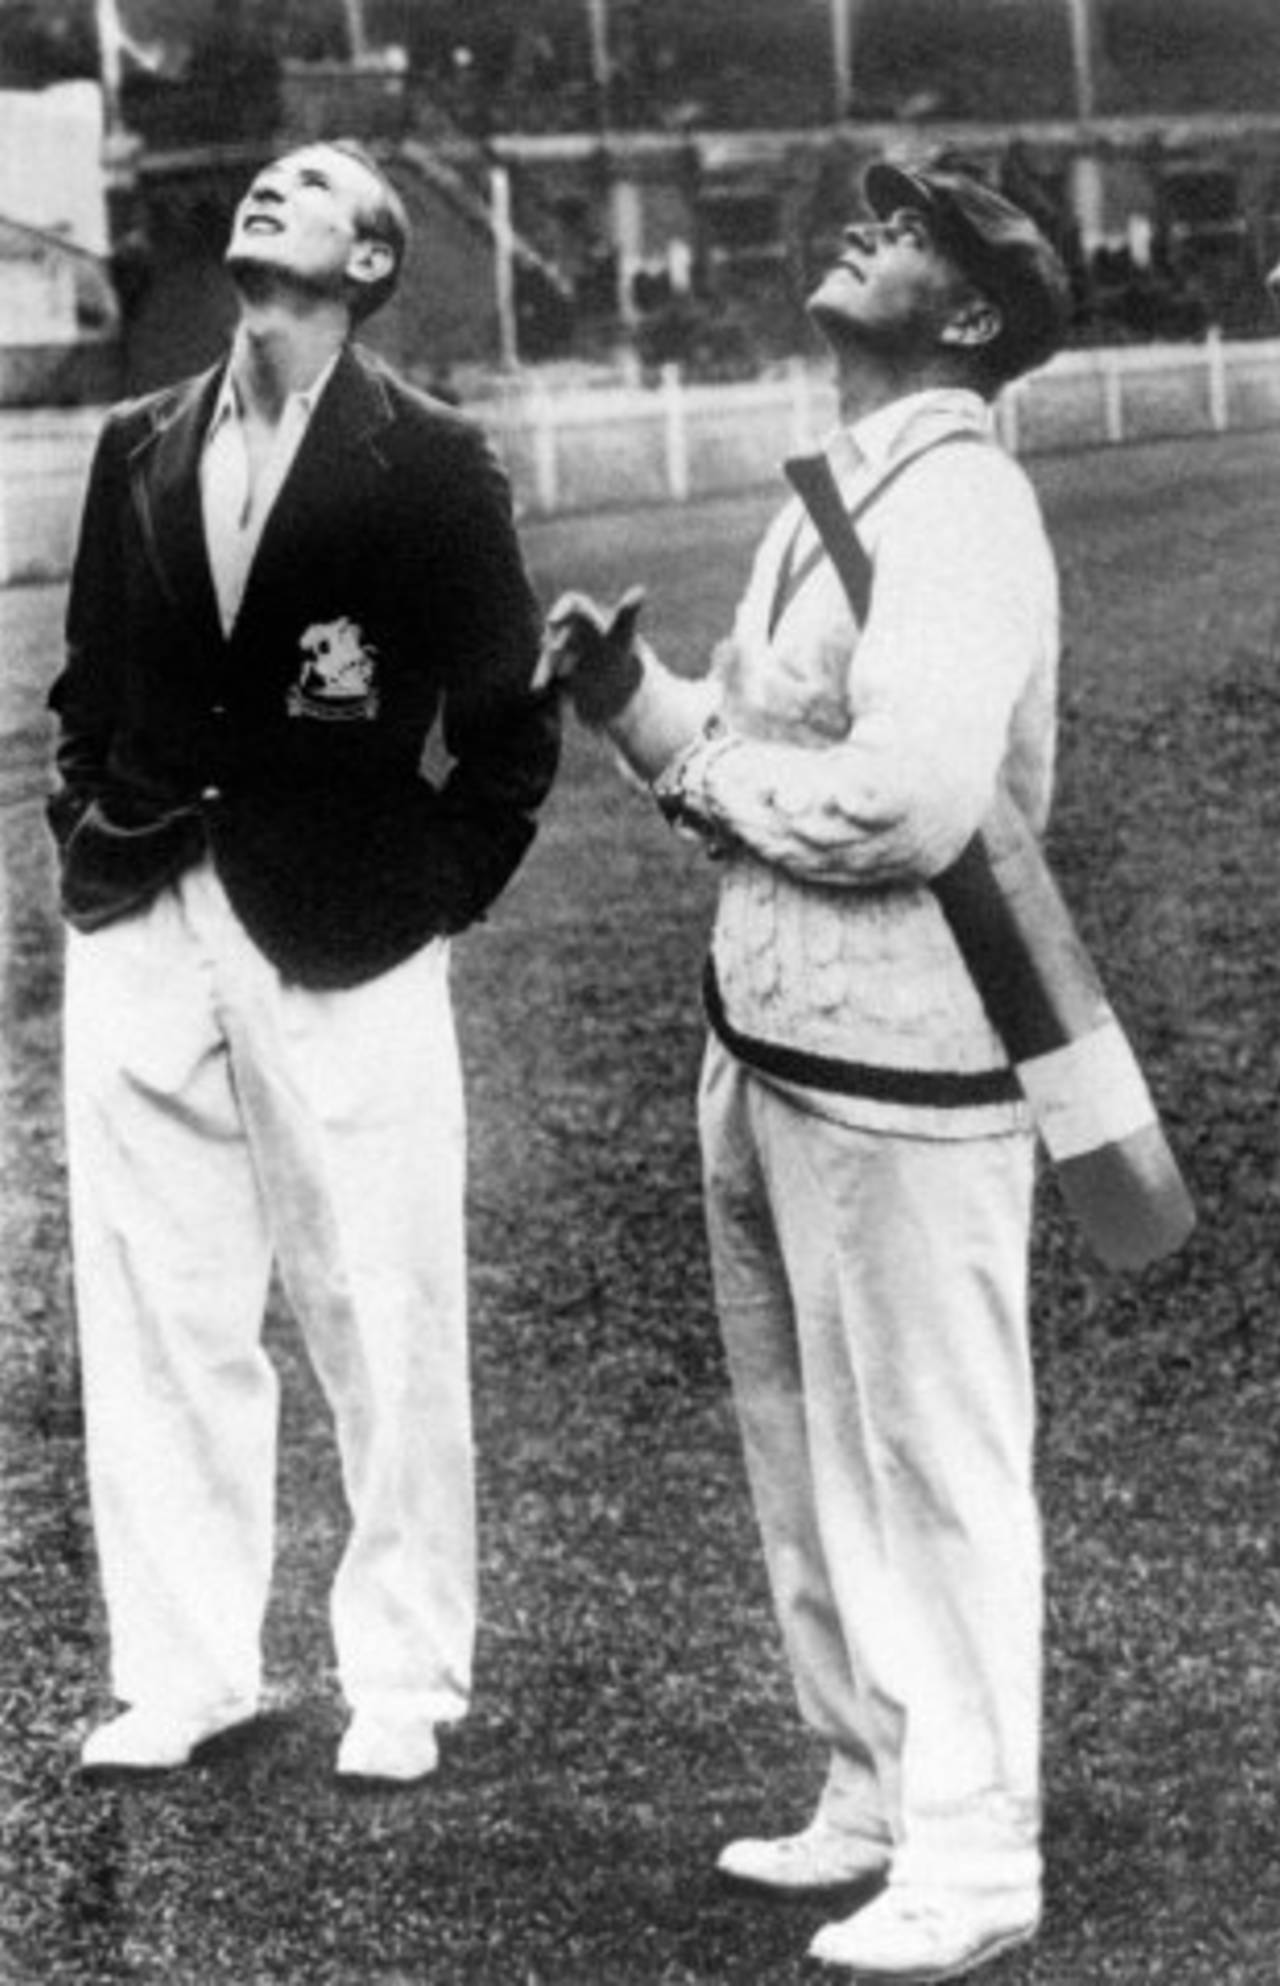 The calm before the storm. Douglas Jardine and Bill Woodfull intently watch the toss of the coin&nbsp;&nbsp;&bull;&nbsp;&nbsp;The Cricketer International